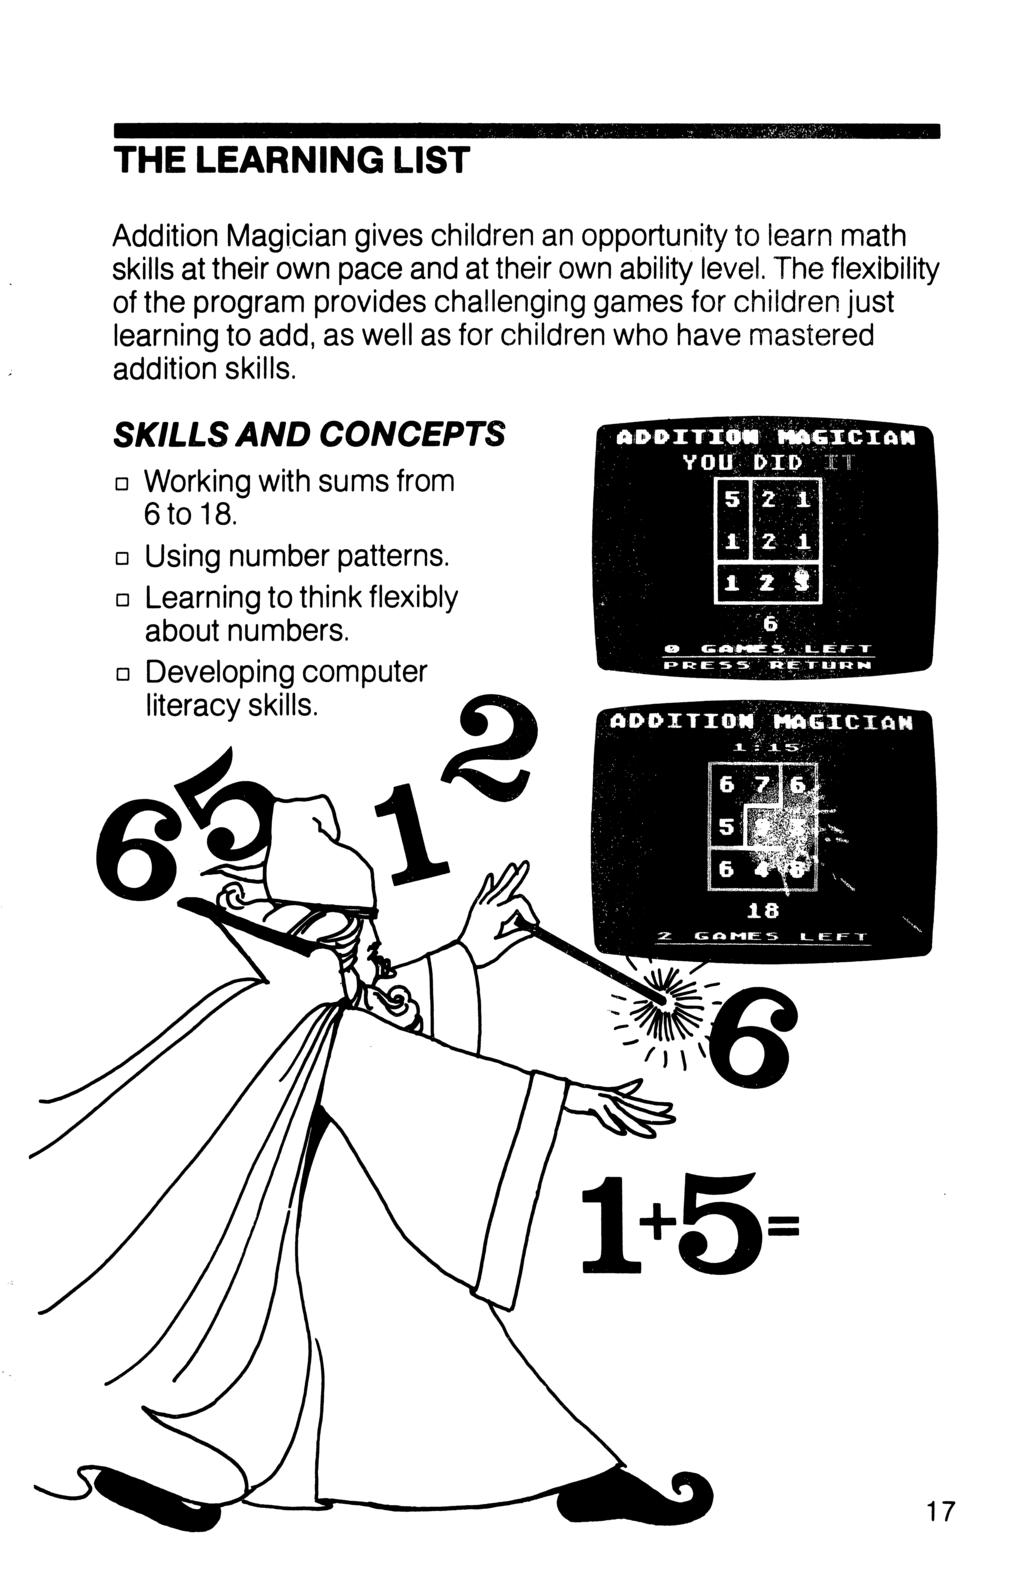 THE LEARNING LIST Addition Magician gives children an opportunity to learn math skills at their own pace and at their own ability level.